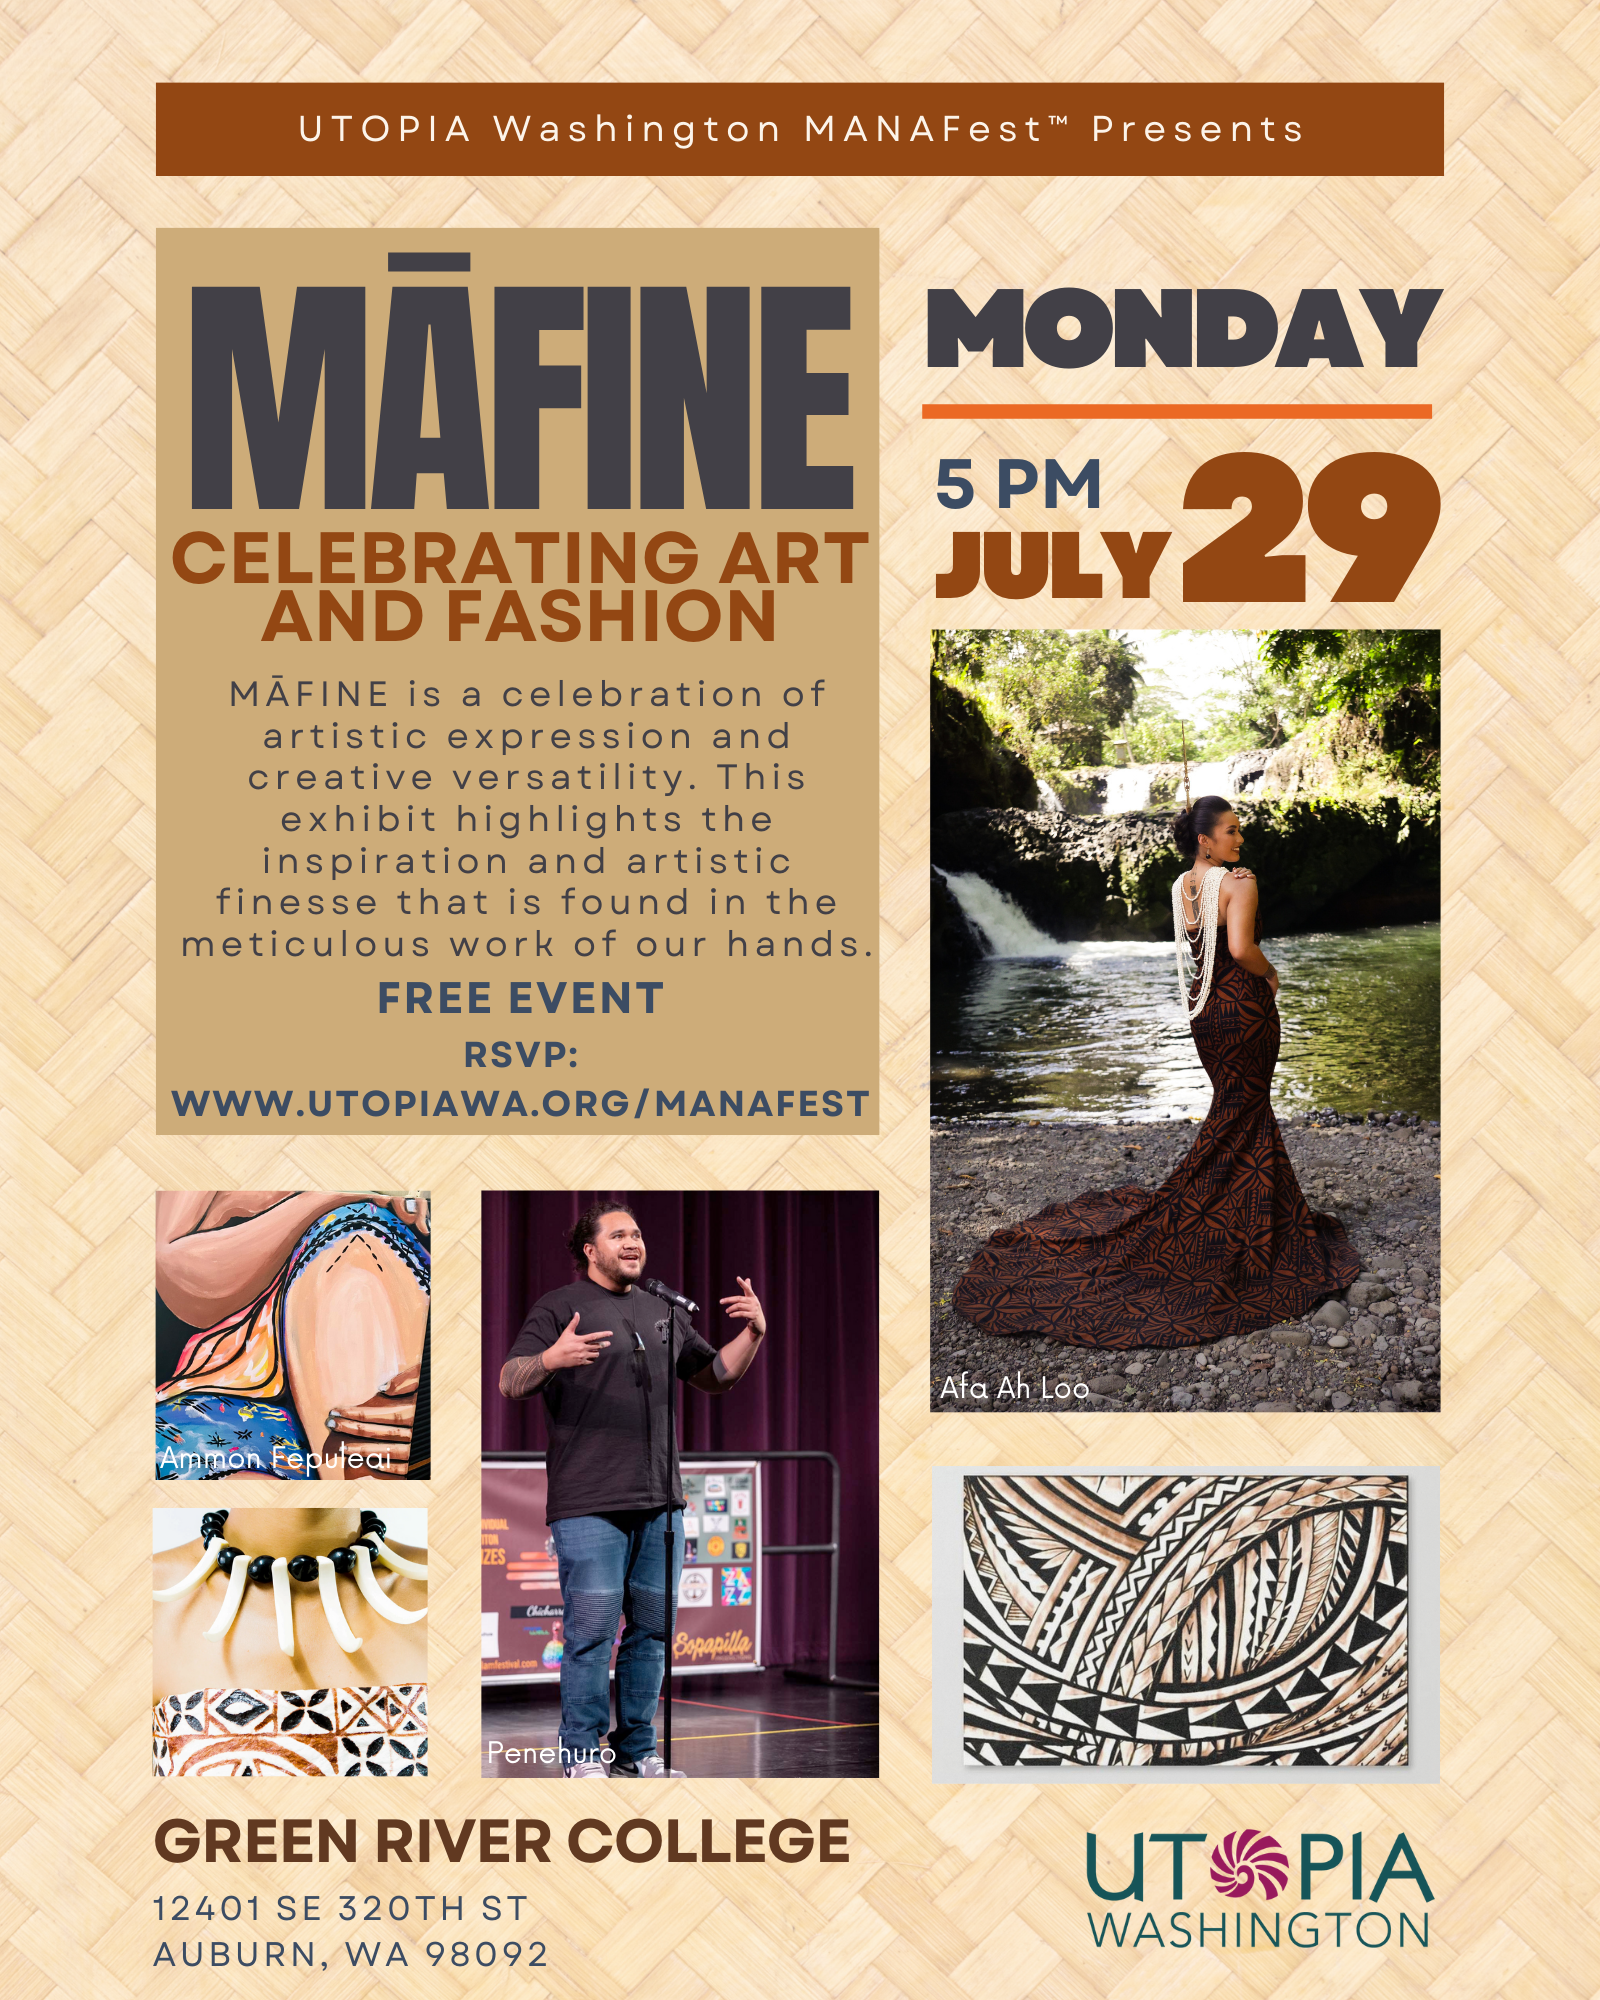 Advertisement for Mafine with photos of art and fashion